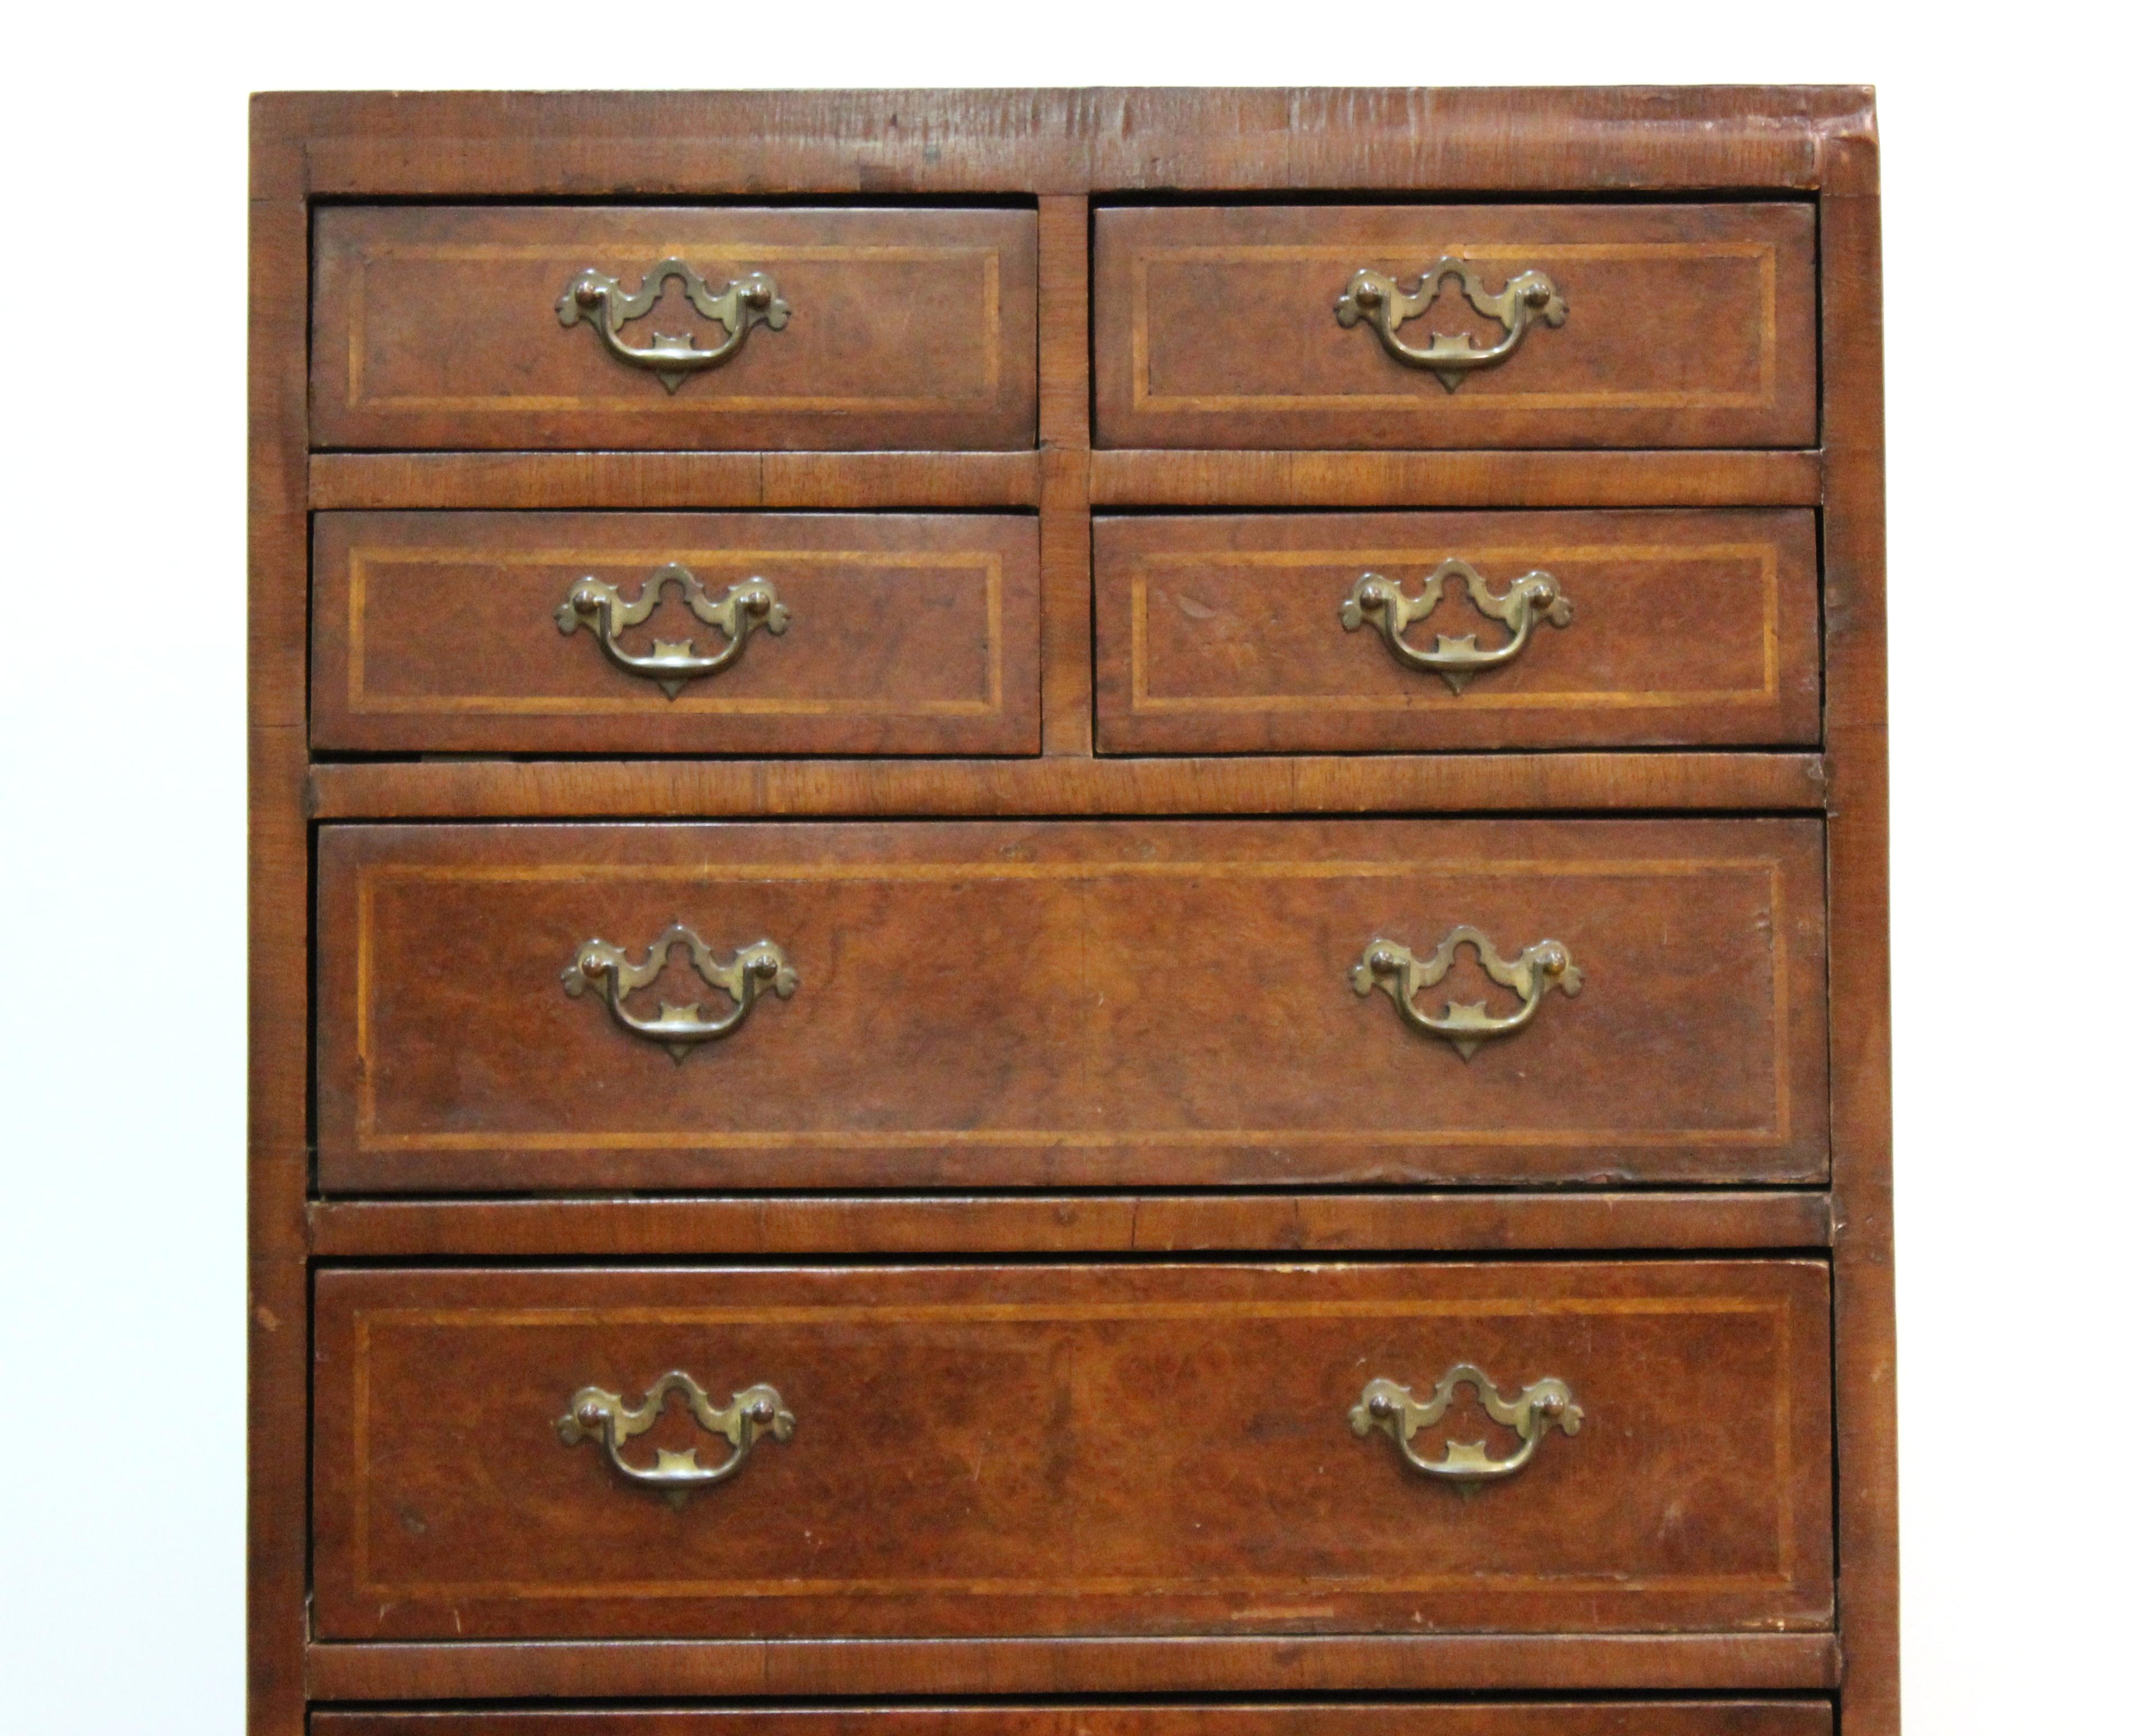 English Chippendale style tall chest of drawers, two smaller drawers on upper two levels above five levels of single drawers.
From the Estate of designer, model, television host, and business woman, Nina Griscom.